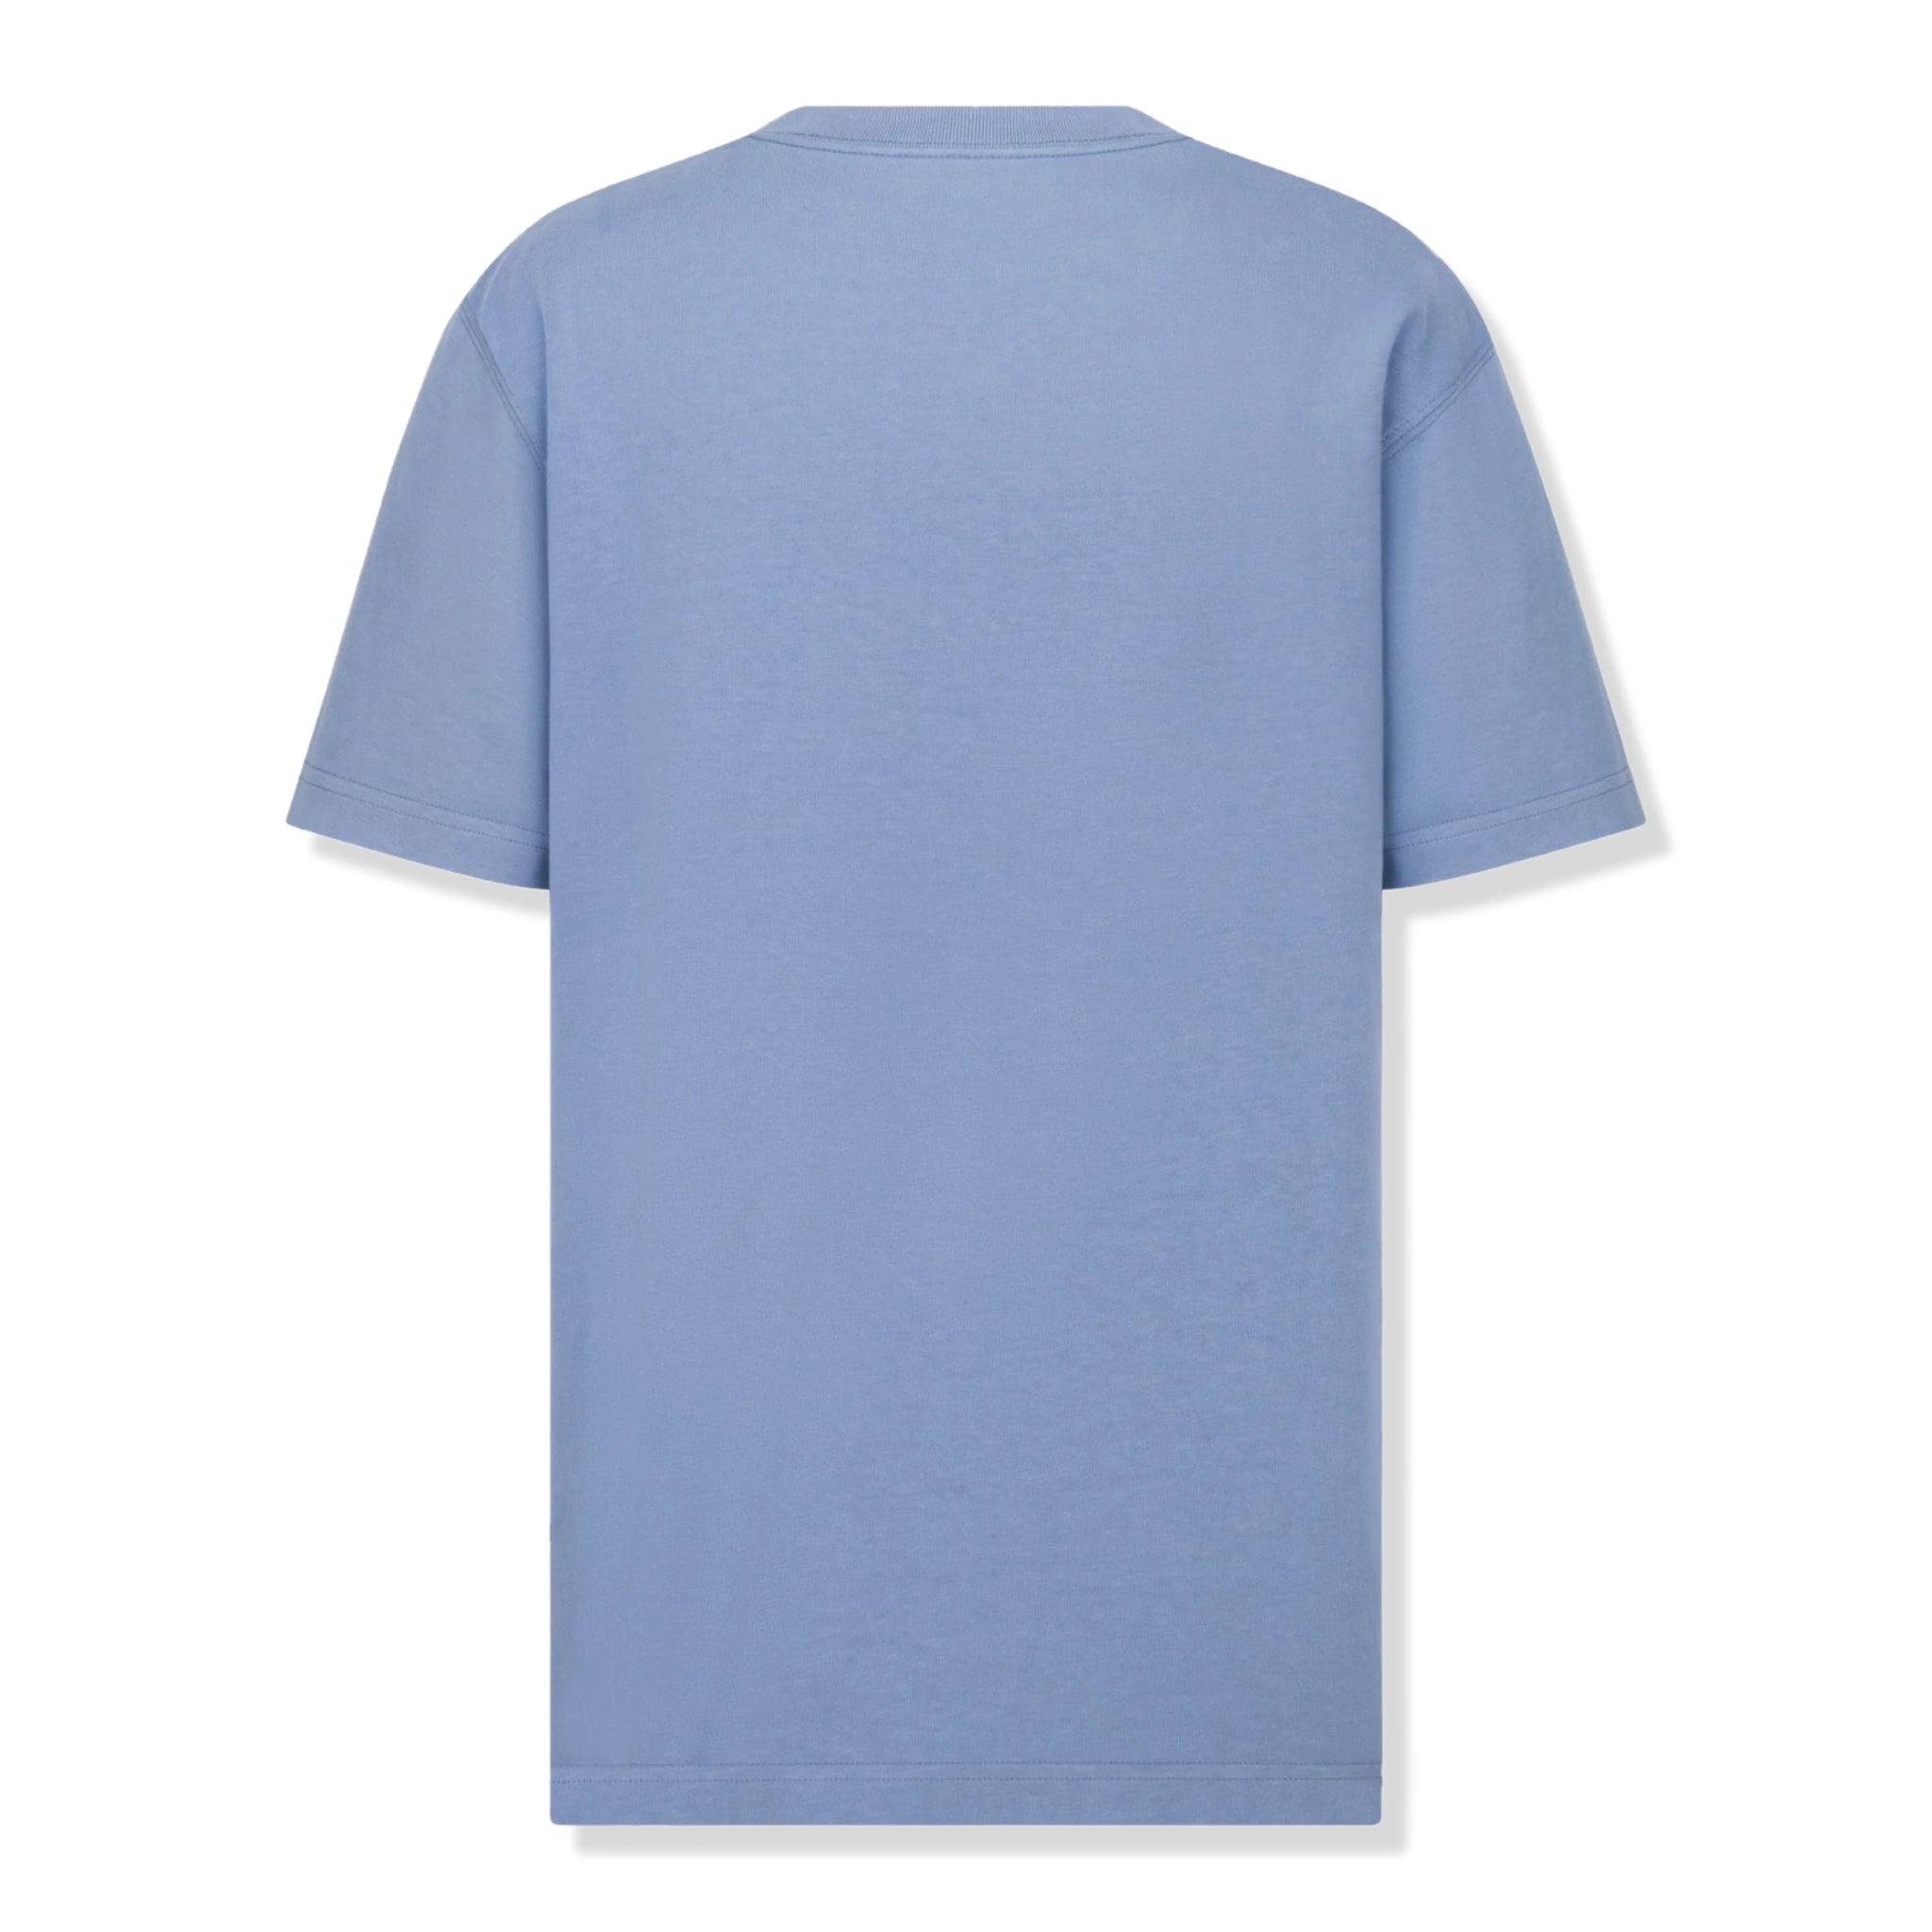 Back view of Dior 'Christian Dior Couture' Relaxed Fit Blue T Shirt 343J696C0554_C580